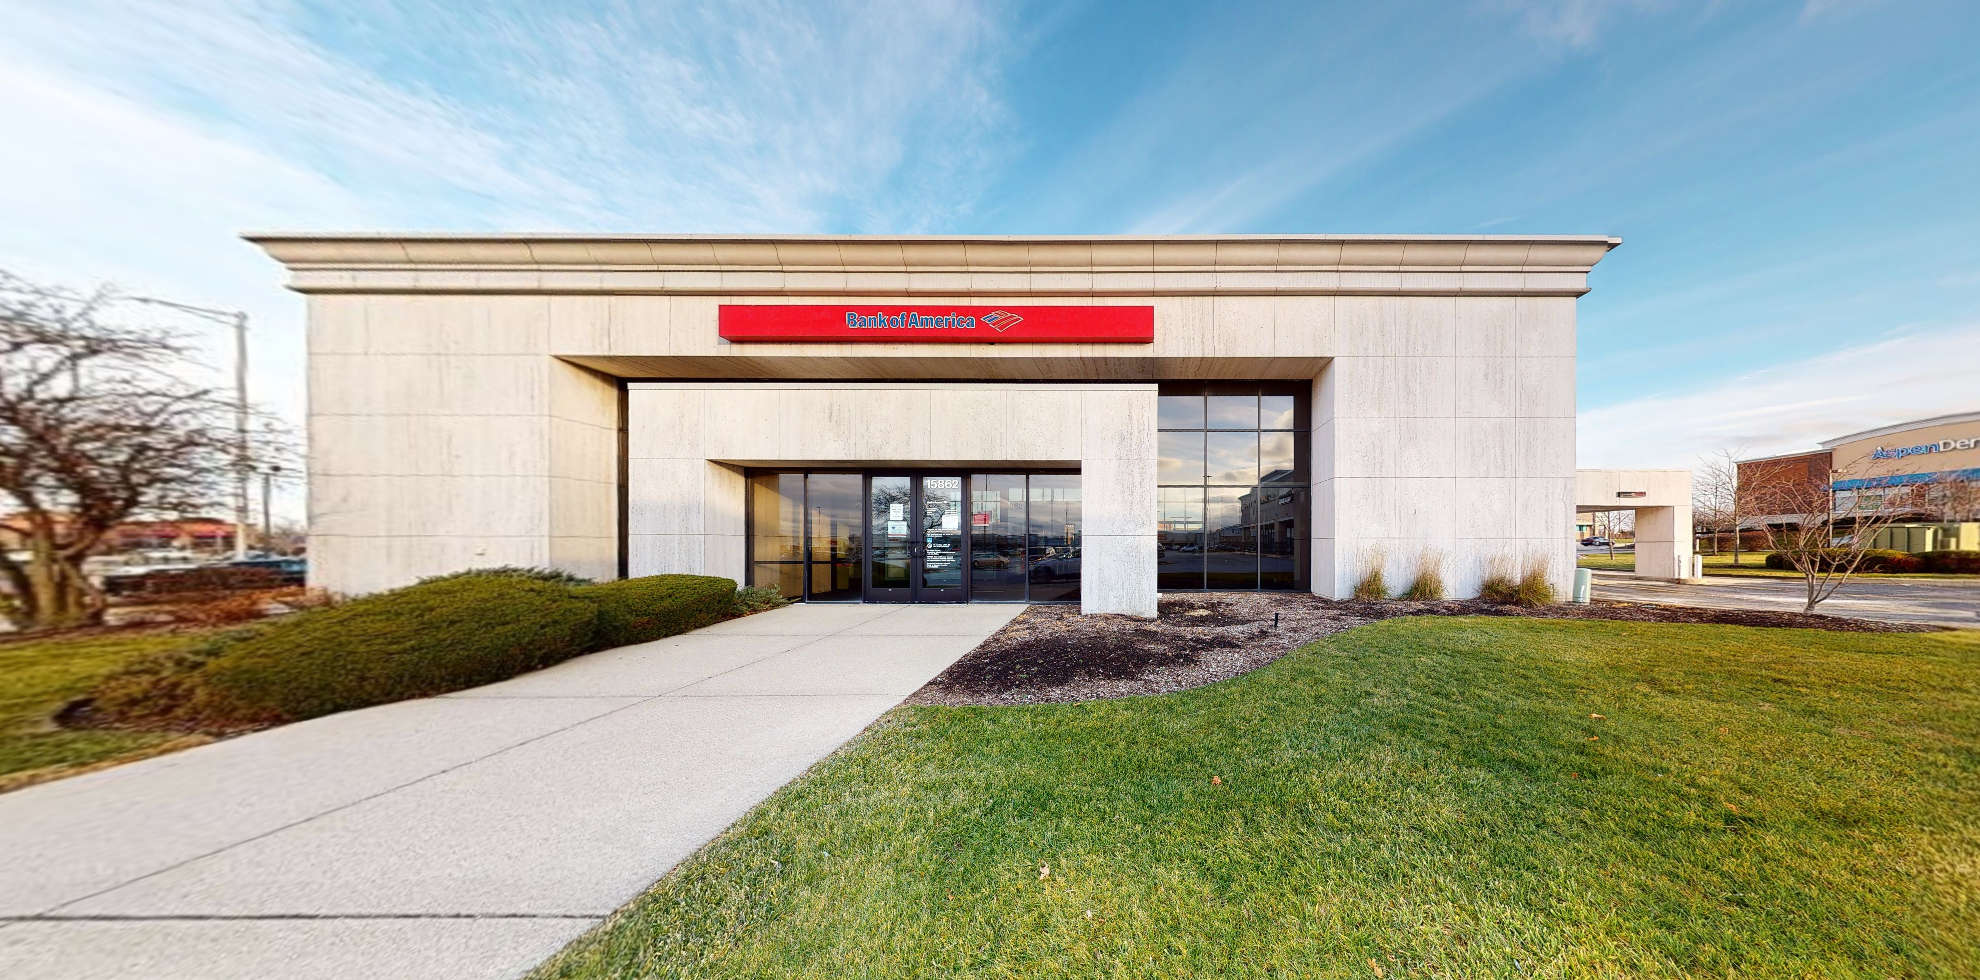 Bank of America financial center with drive-thru ATM | 15862 S La Grange Rd, Orland Park, IL 60462